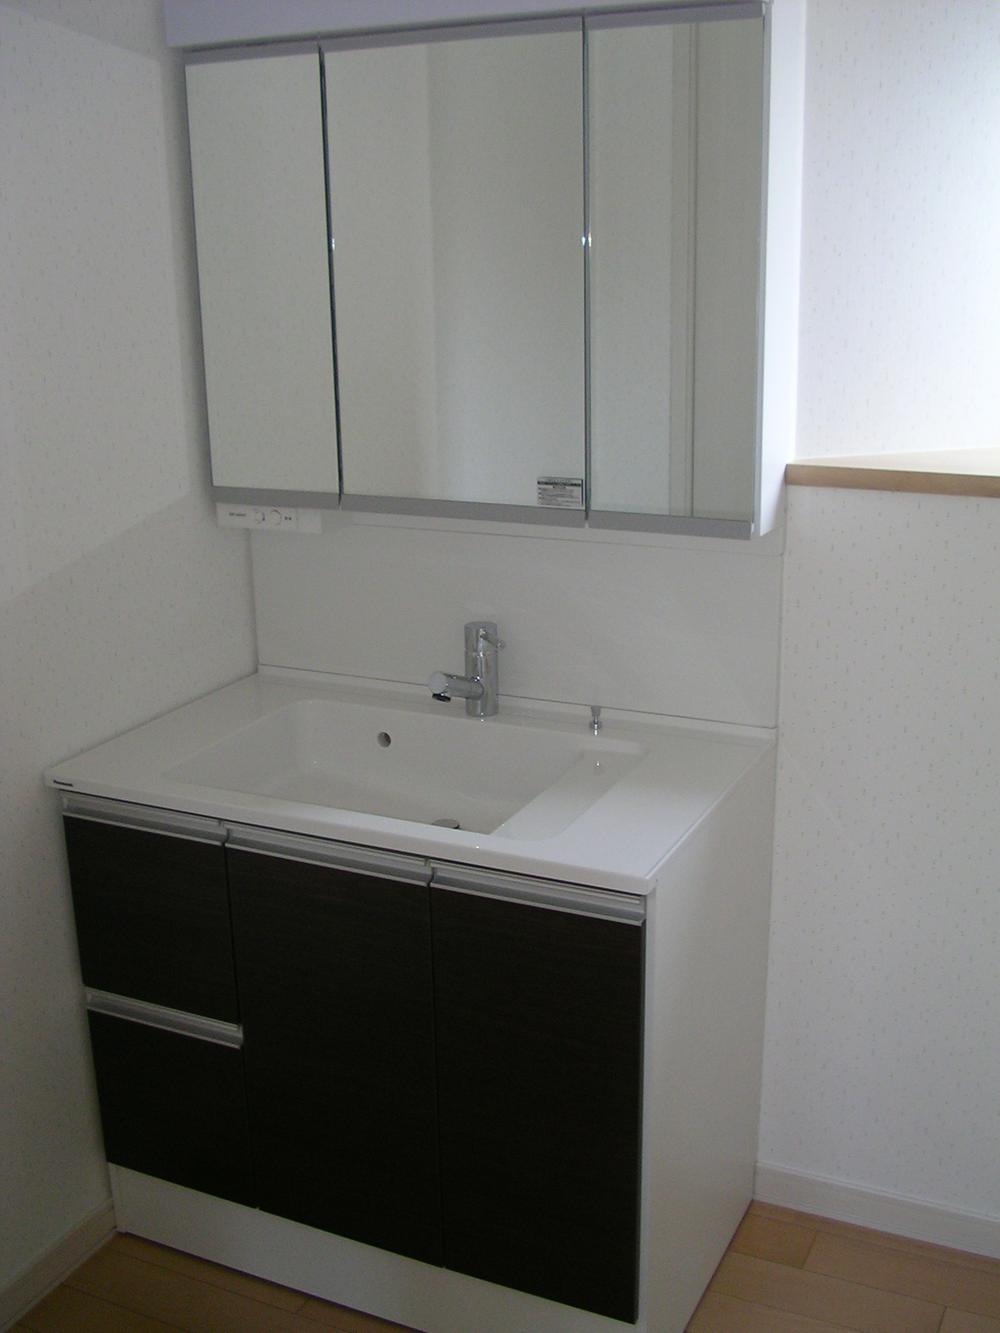 Wash basin, toilet. It is the washstand of the triple mirror type. Shampoo is also possible to do so has become a shower hose.